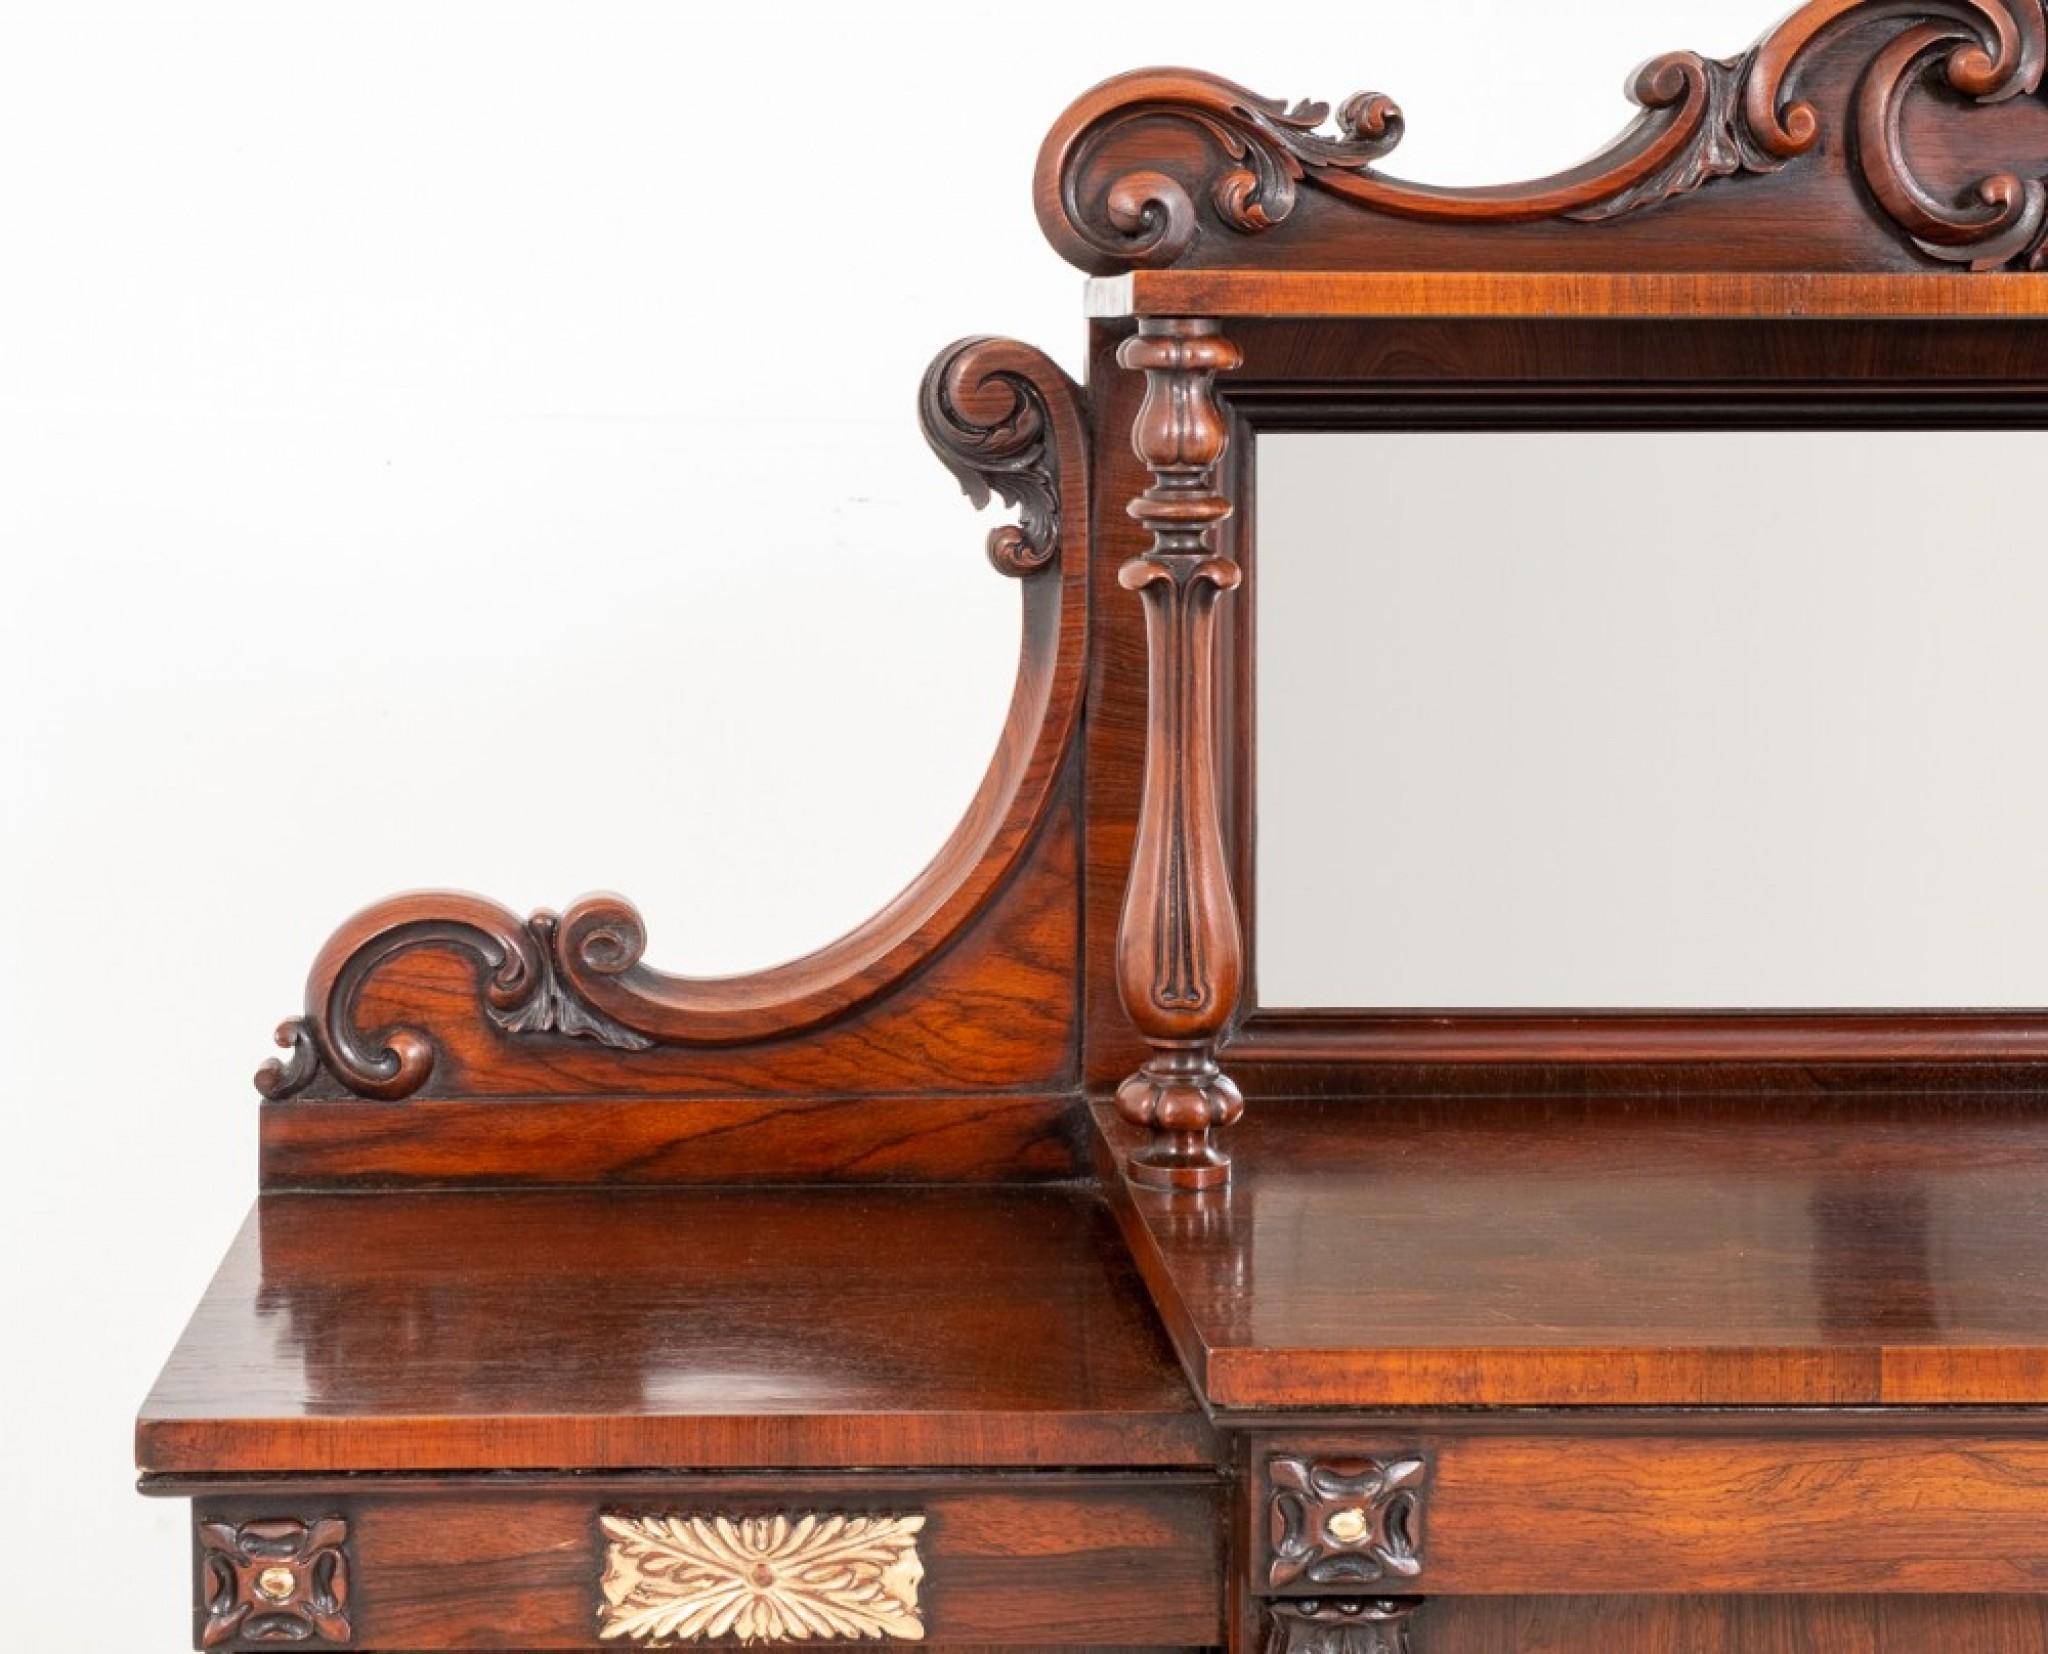 Impressive William IV rosewood side cabinet.
19th century
Raised upon a plinth base with 4 arched doors, each door having half turned mouldings.
The cabinet features turned columns with typical carved turnings to the tops and bottoms.
The